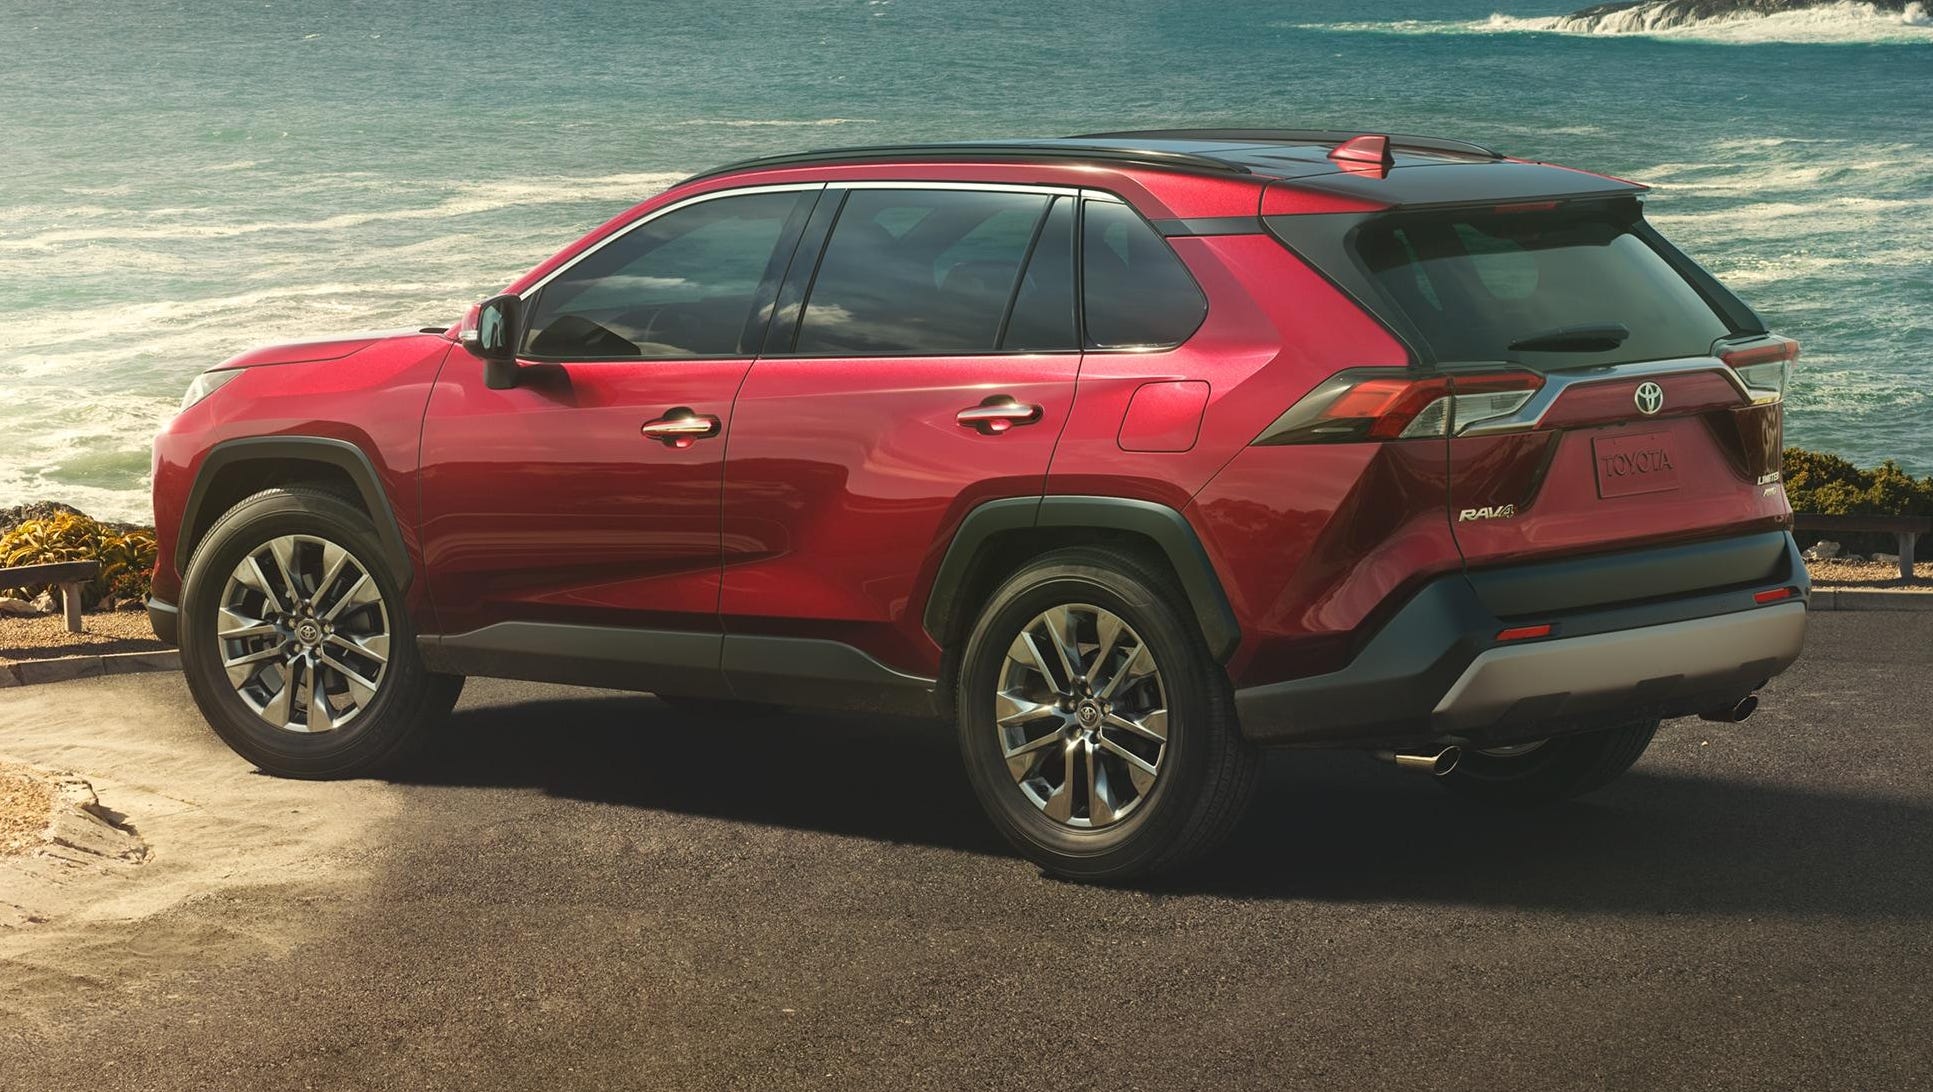 The 2019 RAV4 will offer a new all-wheel drive system and sporty XSE Hybrid model.